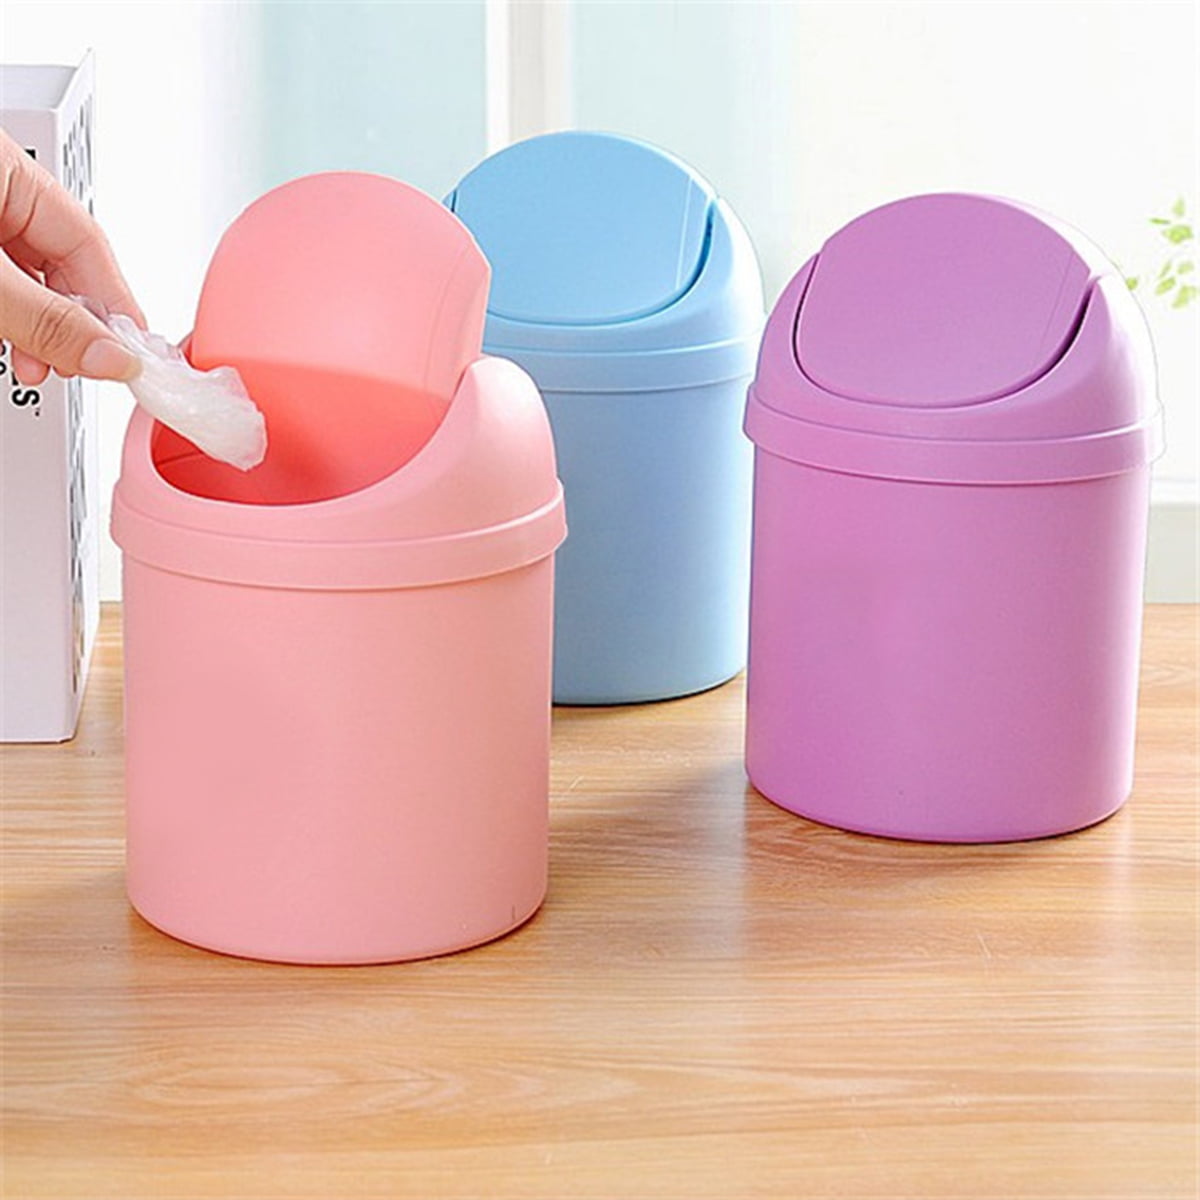 Mini Small Waste Bin Desktop Garbage Basket Table Home Office Trash Can with Lid